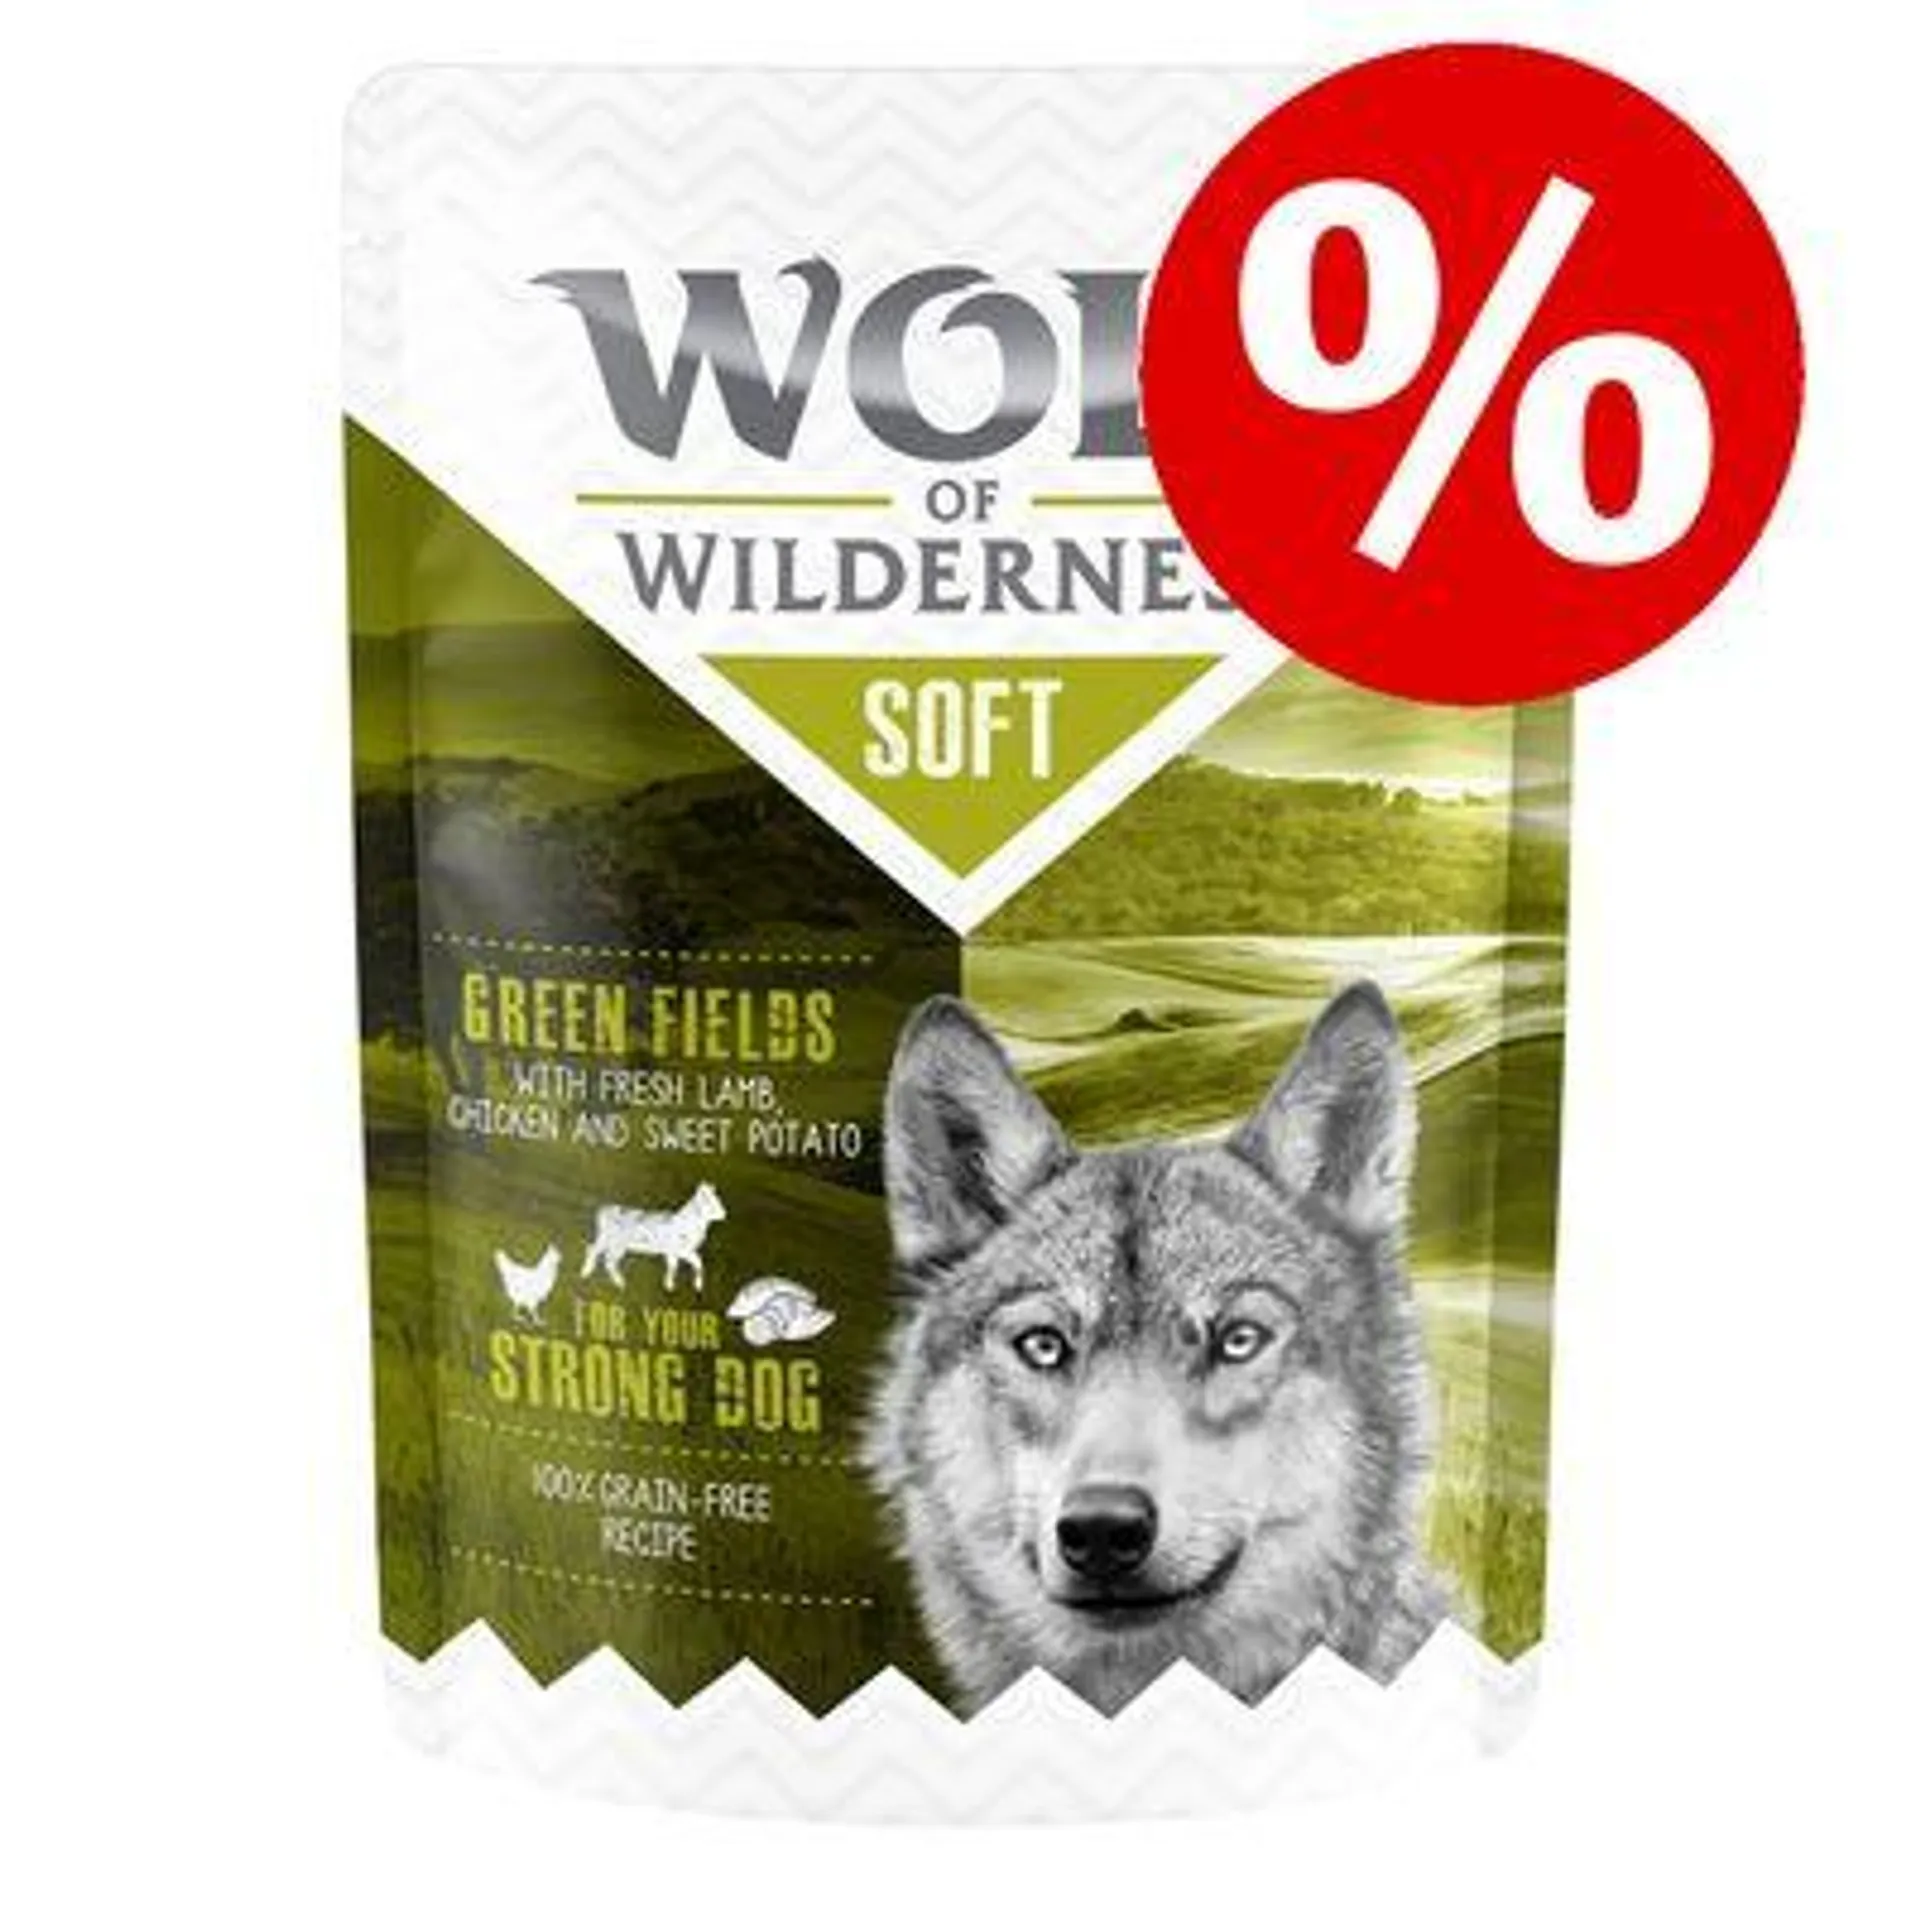 6 x 300g Wolf of Wilderness Adult "Soft" Pouches - Special Price!*